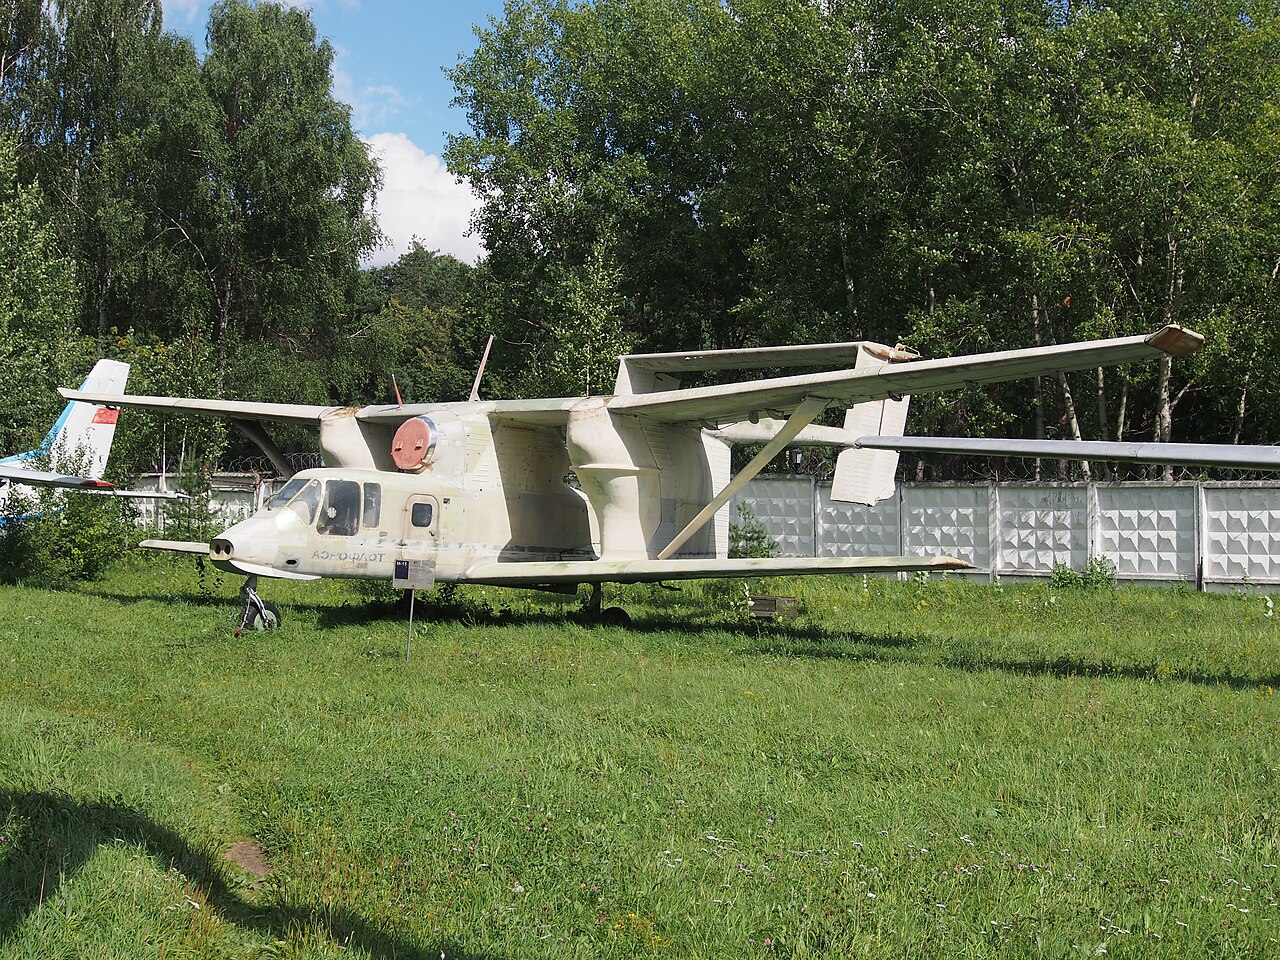 1280px-PZL_M-15_Belphegor_at_Central_Air_Force_Museum_Monino_pic1.JPG